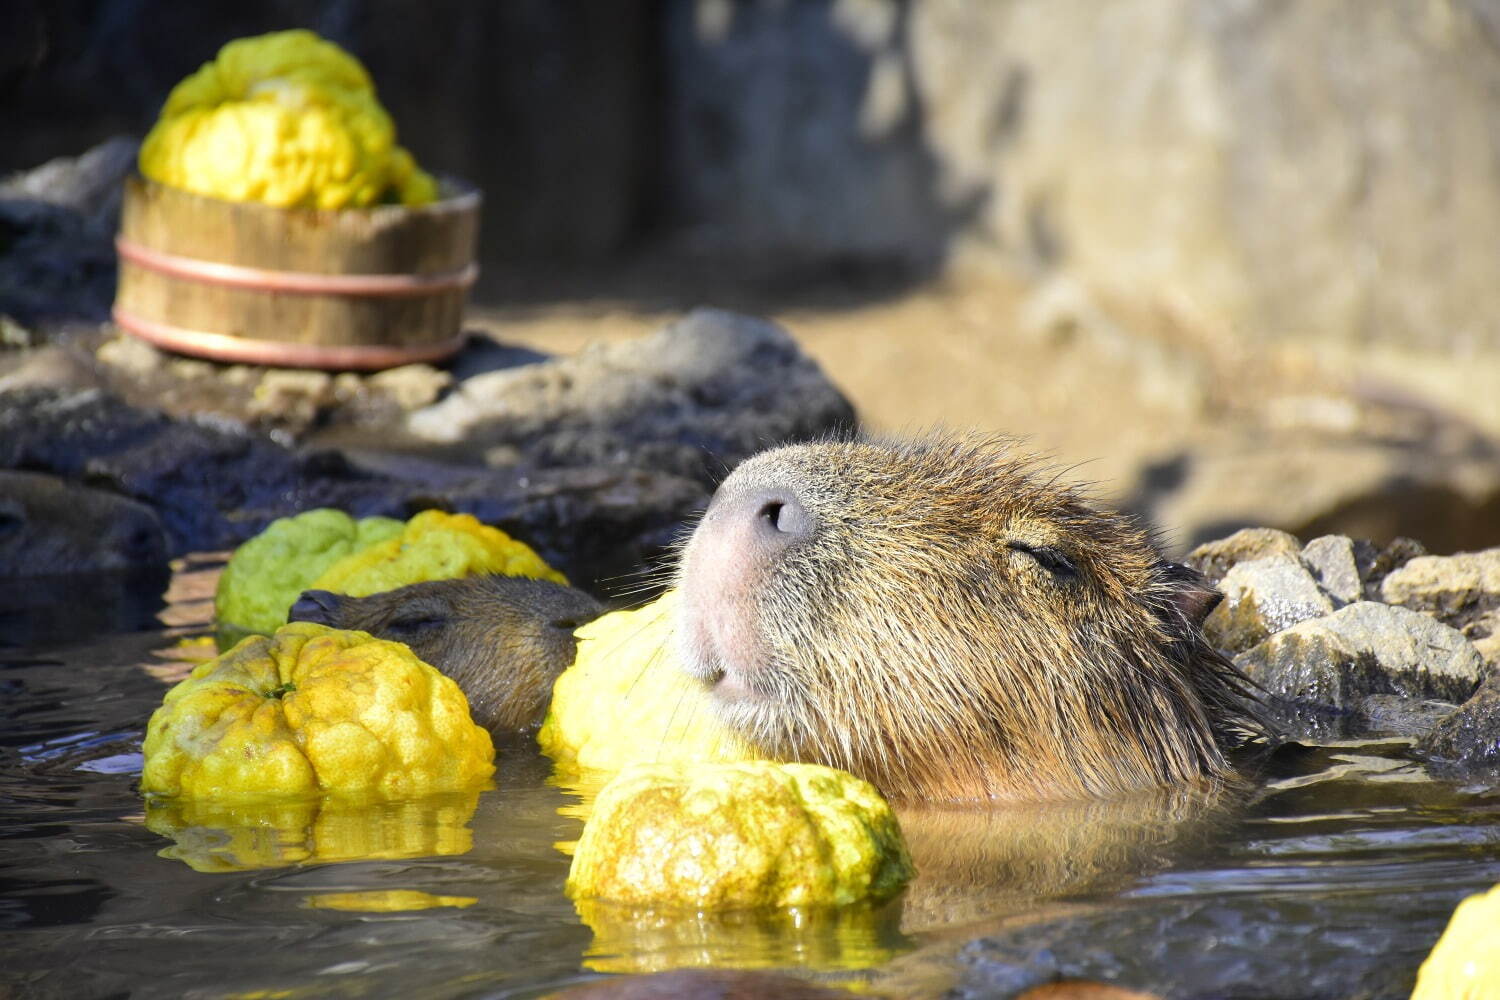 40 Years of Hot Baths for Capybaras